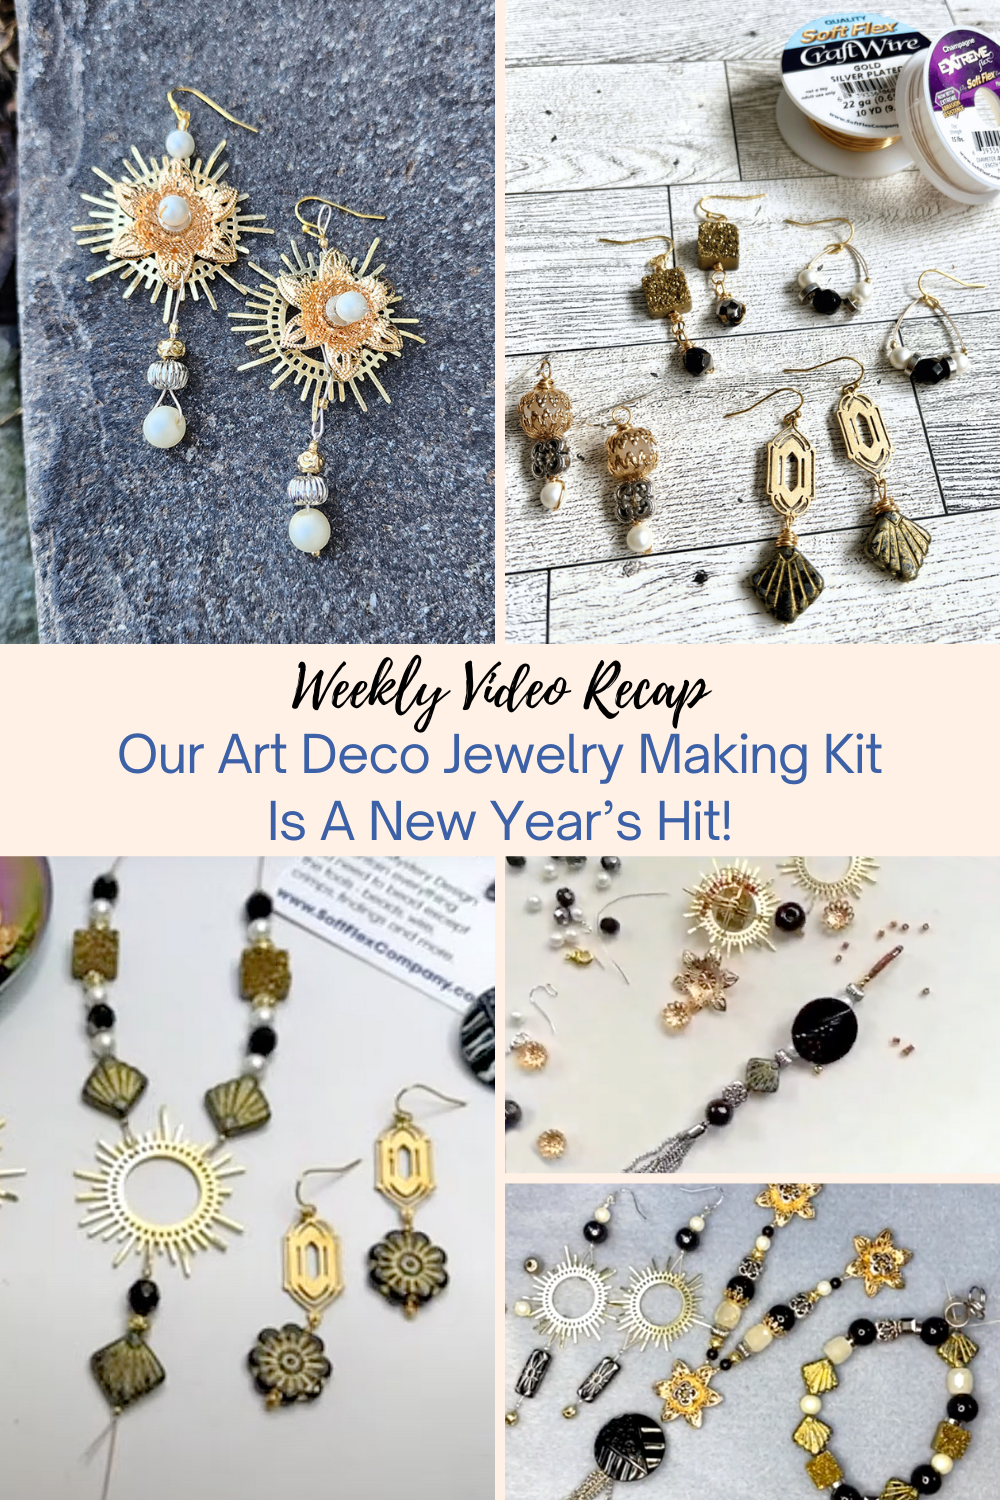 Our Art Deco Jewelry Making Kit Is A New Year's Hit! Collage